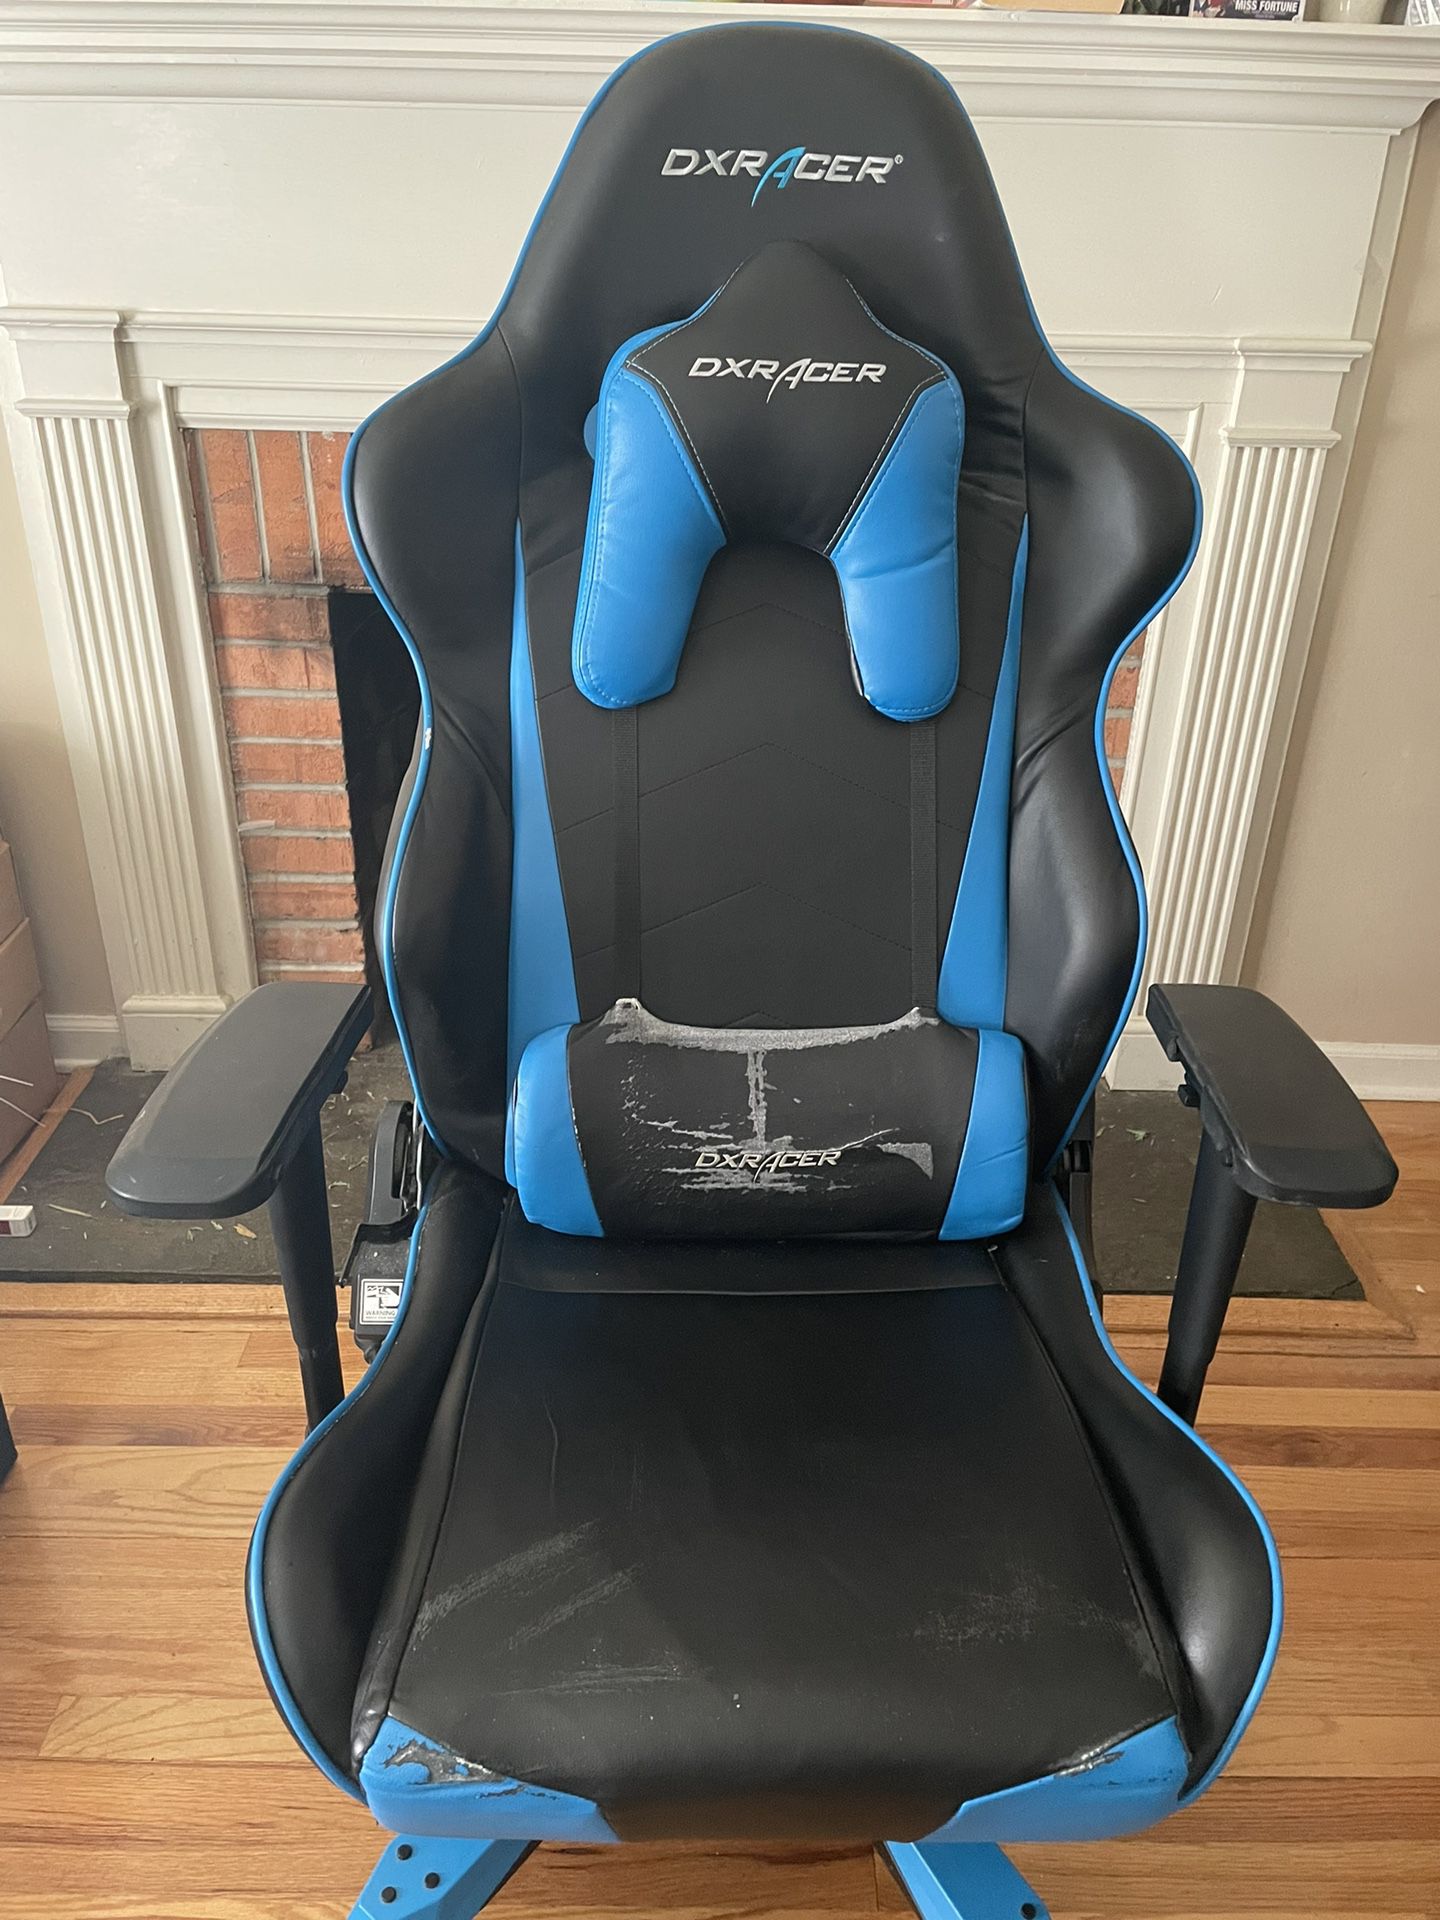 Why Choose DXRacer?, Buy a Gaming Chair, Blog